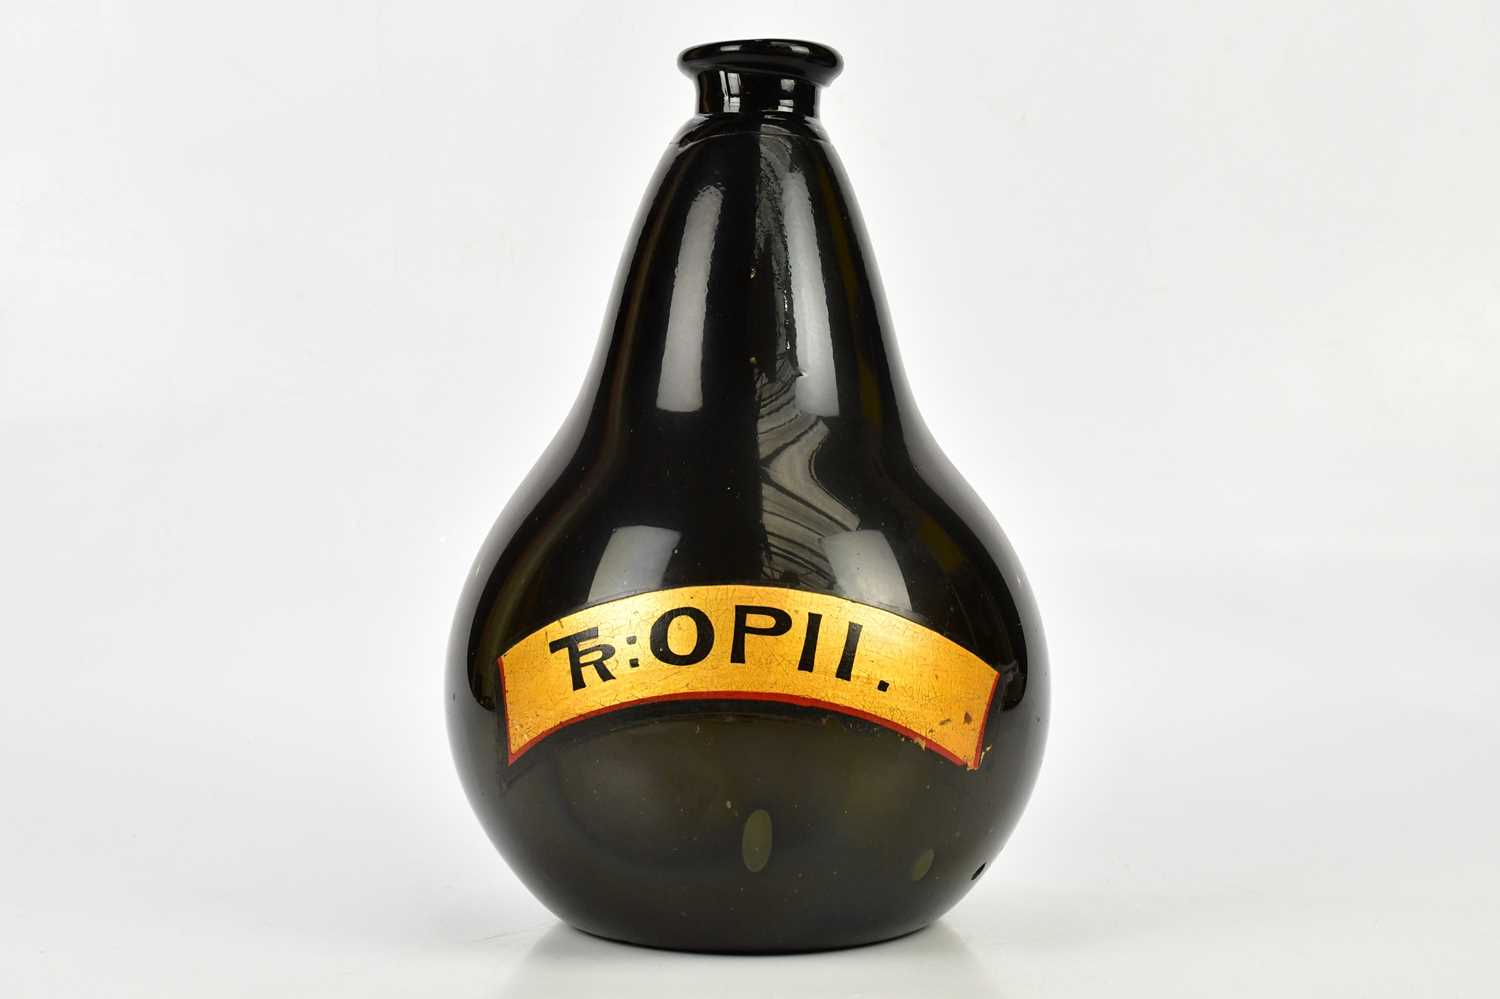 A Victorian black glass pharmaceutical bottle with gilt label 'TR:OPII', height 30cm. Condition